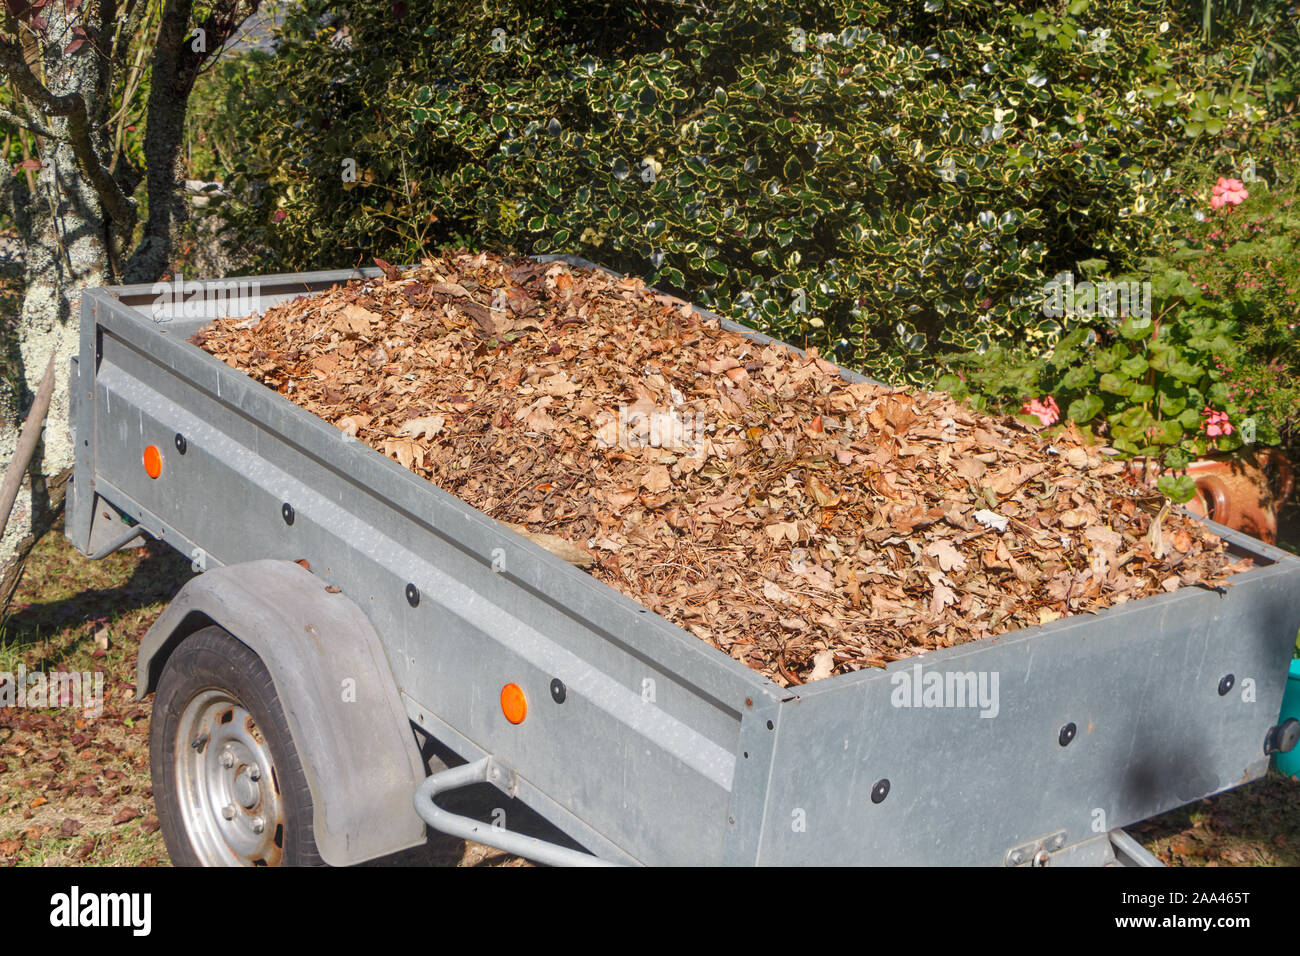 Trailer full of dead leaves after collection in a garden during autumn Stock Photo